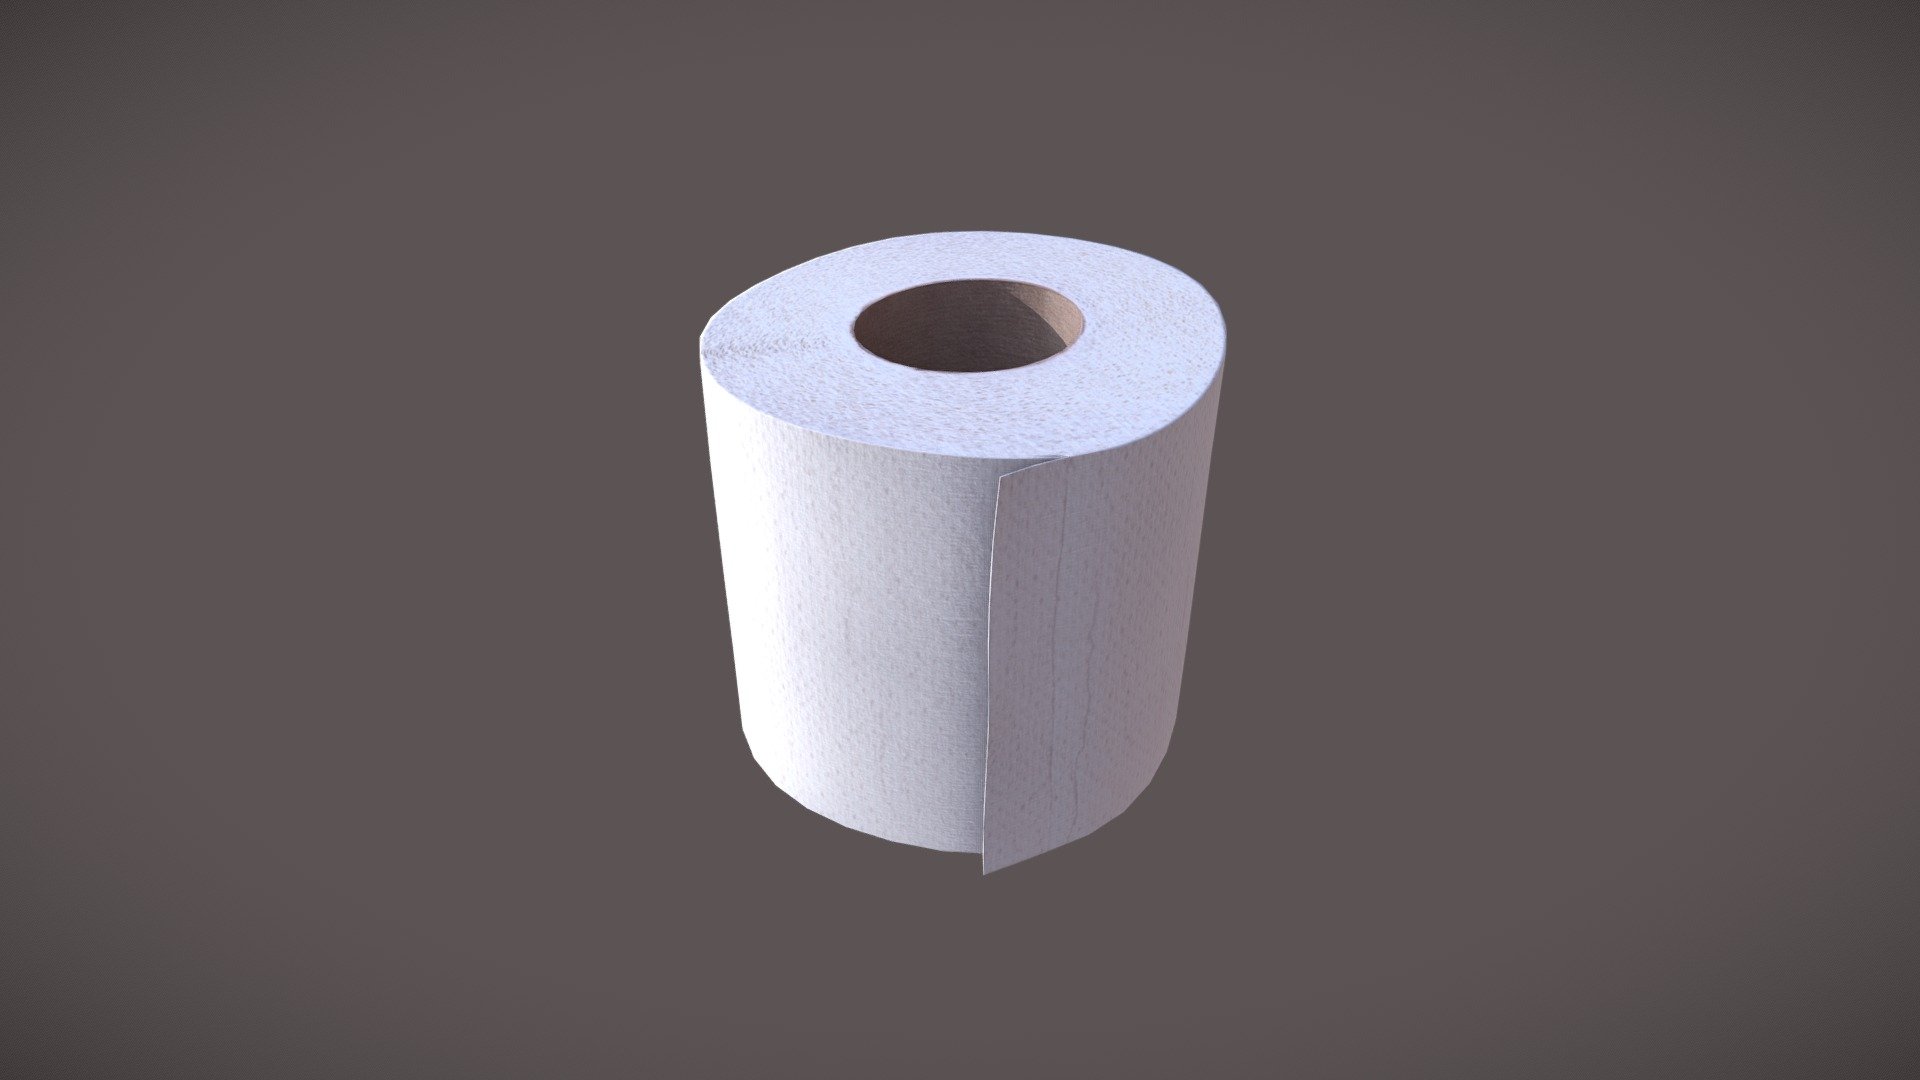 3d model is low poly and game-ready. The model is optimized, not suitable for smoothed modifiers, without supporting edges.

Real scale - Units: cm - (Proportions and sizes are observed and as close as possible to the real object) ~ 10,3 x 10,9 x 9,4 cm 3d model